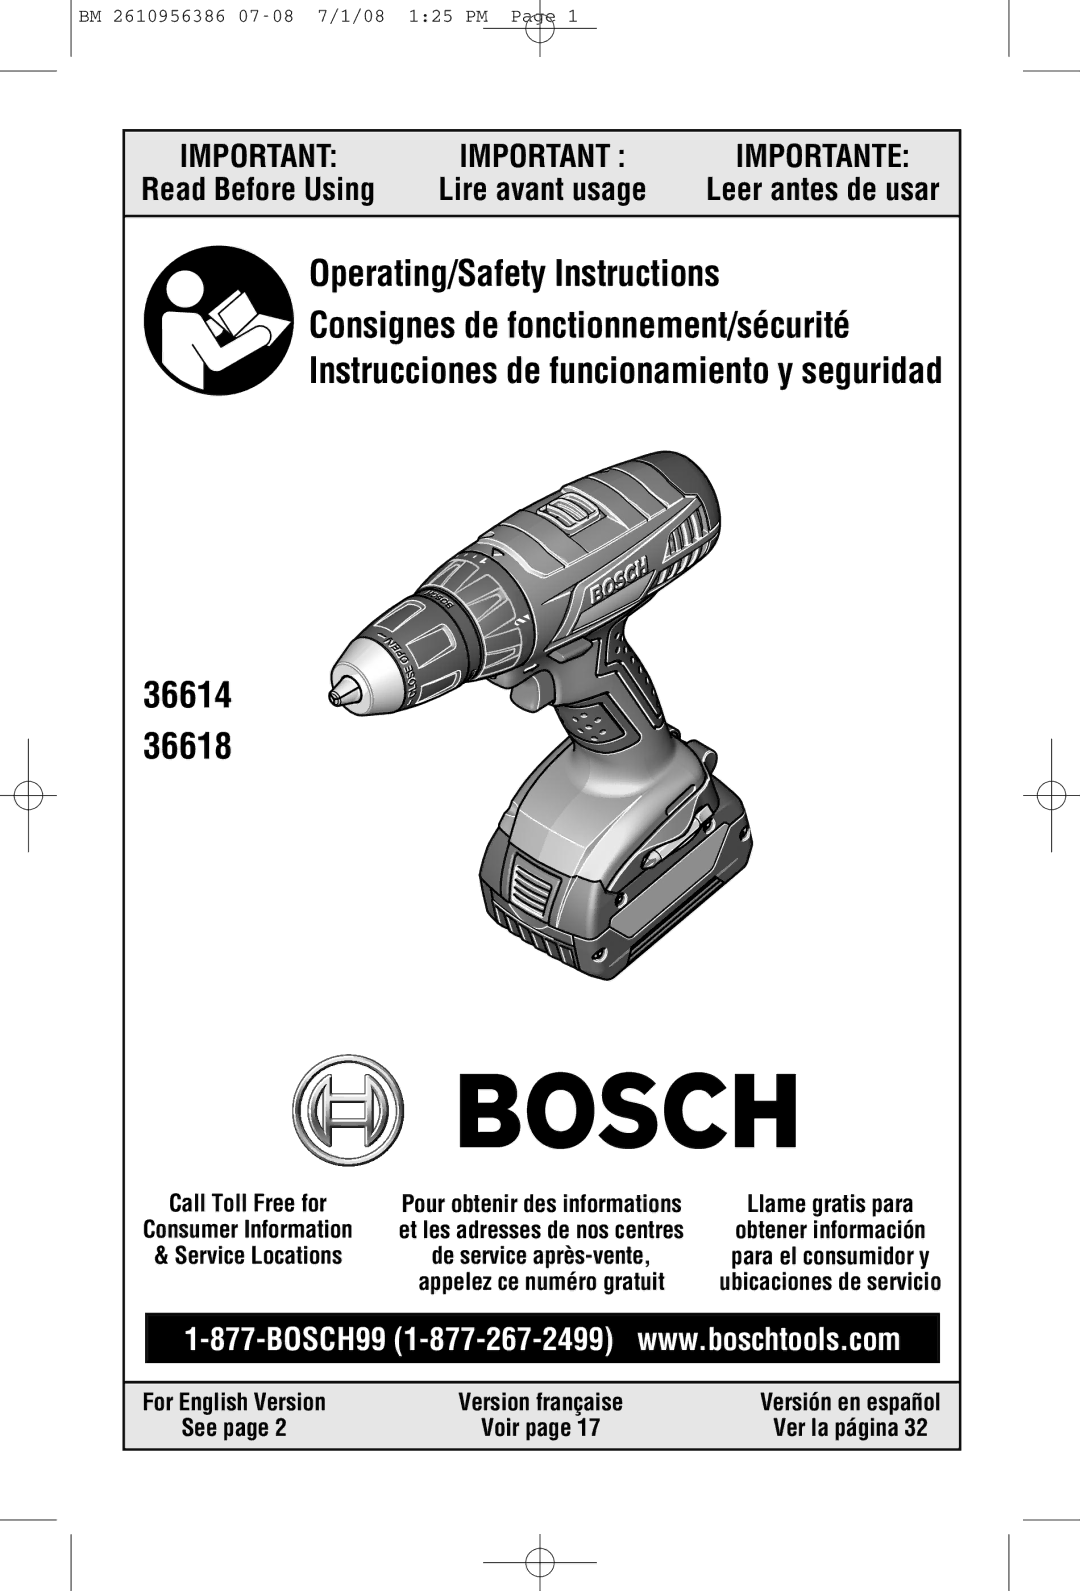 Bosch Power Tools 36618, 36614 manual Read Before Using 